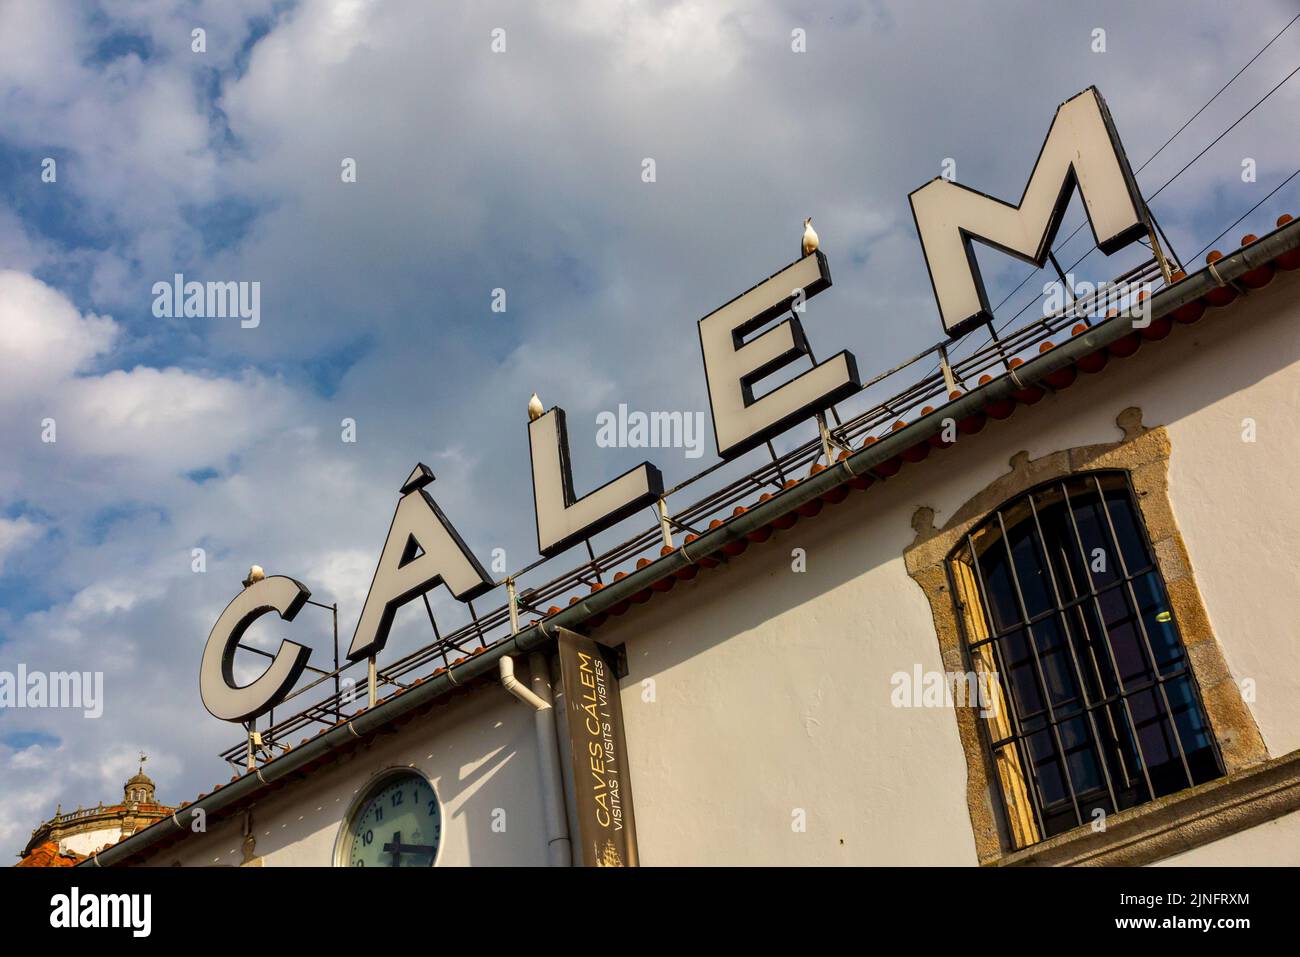 Calem wine and port cellars on the waterfront at Vila Nova de Gaia in the centre of Porto a city in northern Portugal. Stock Photo